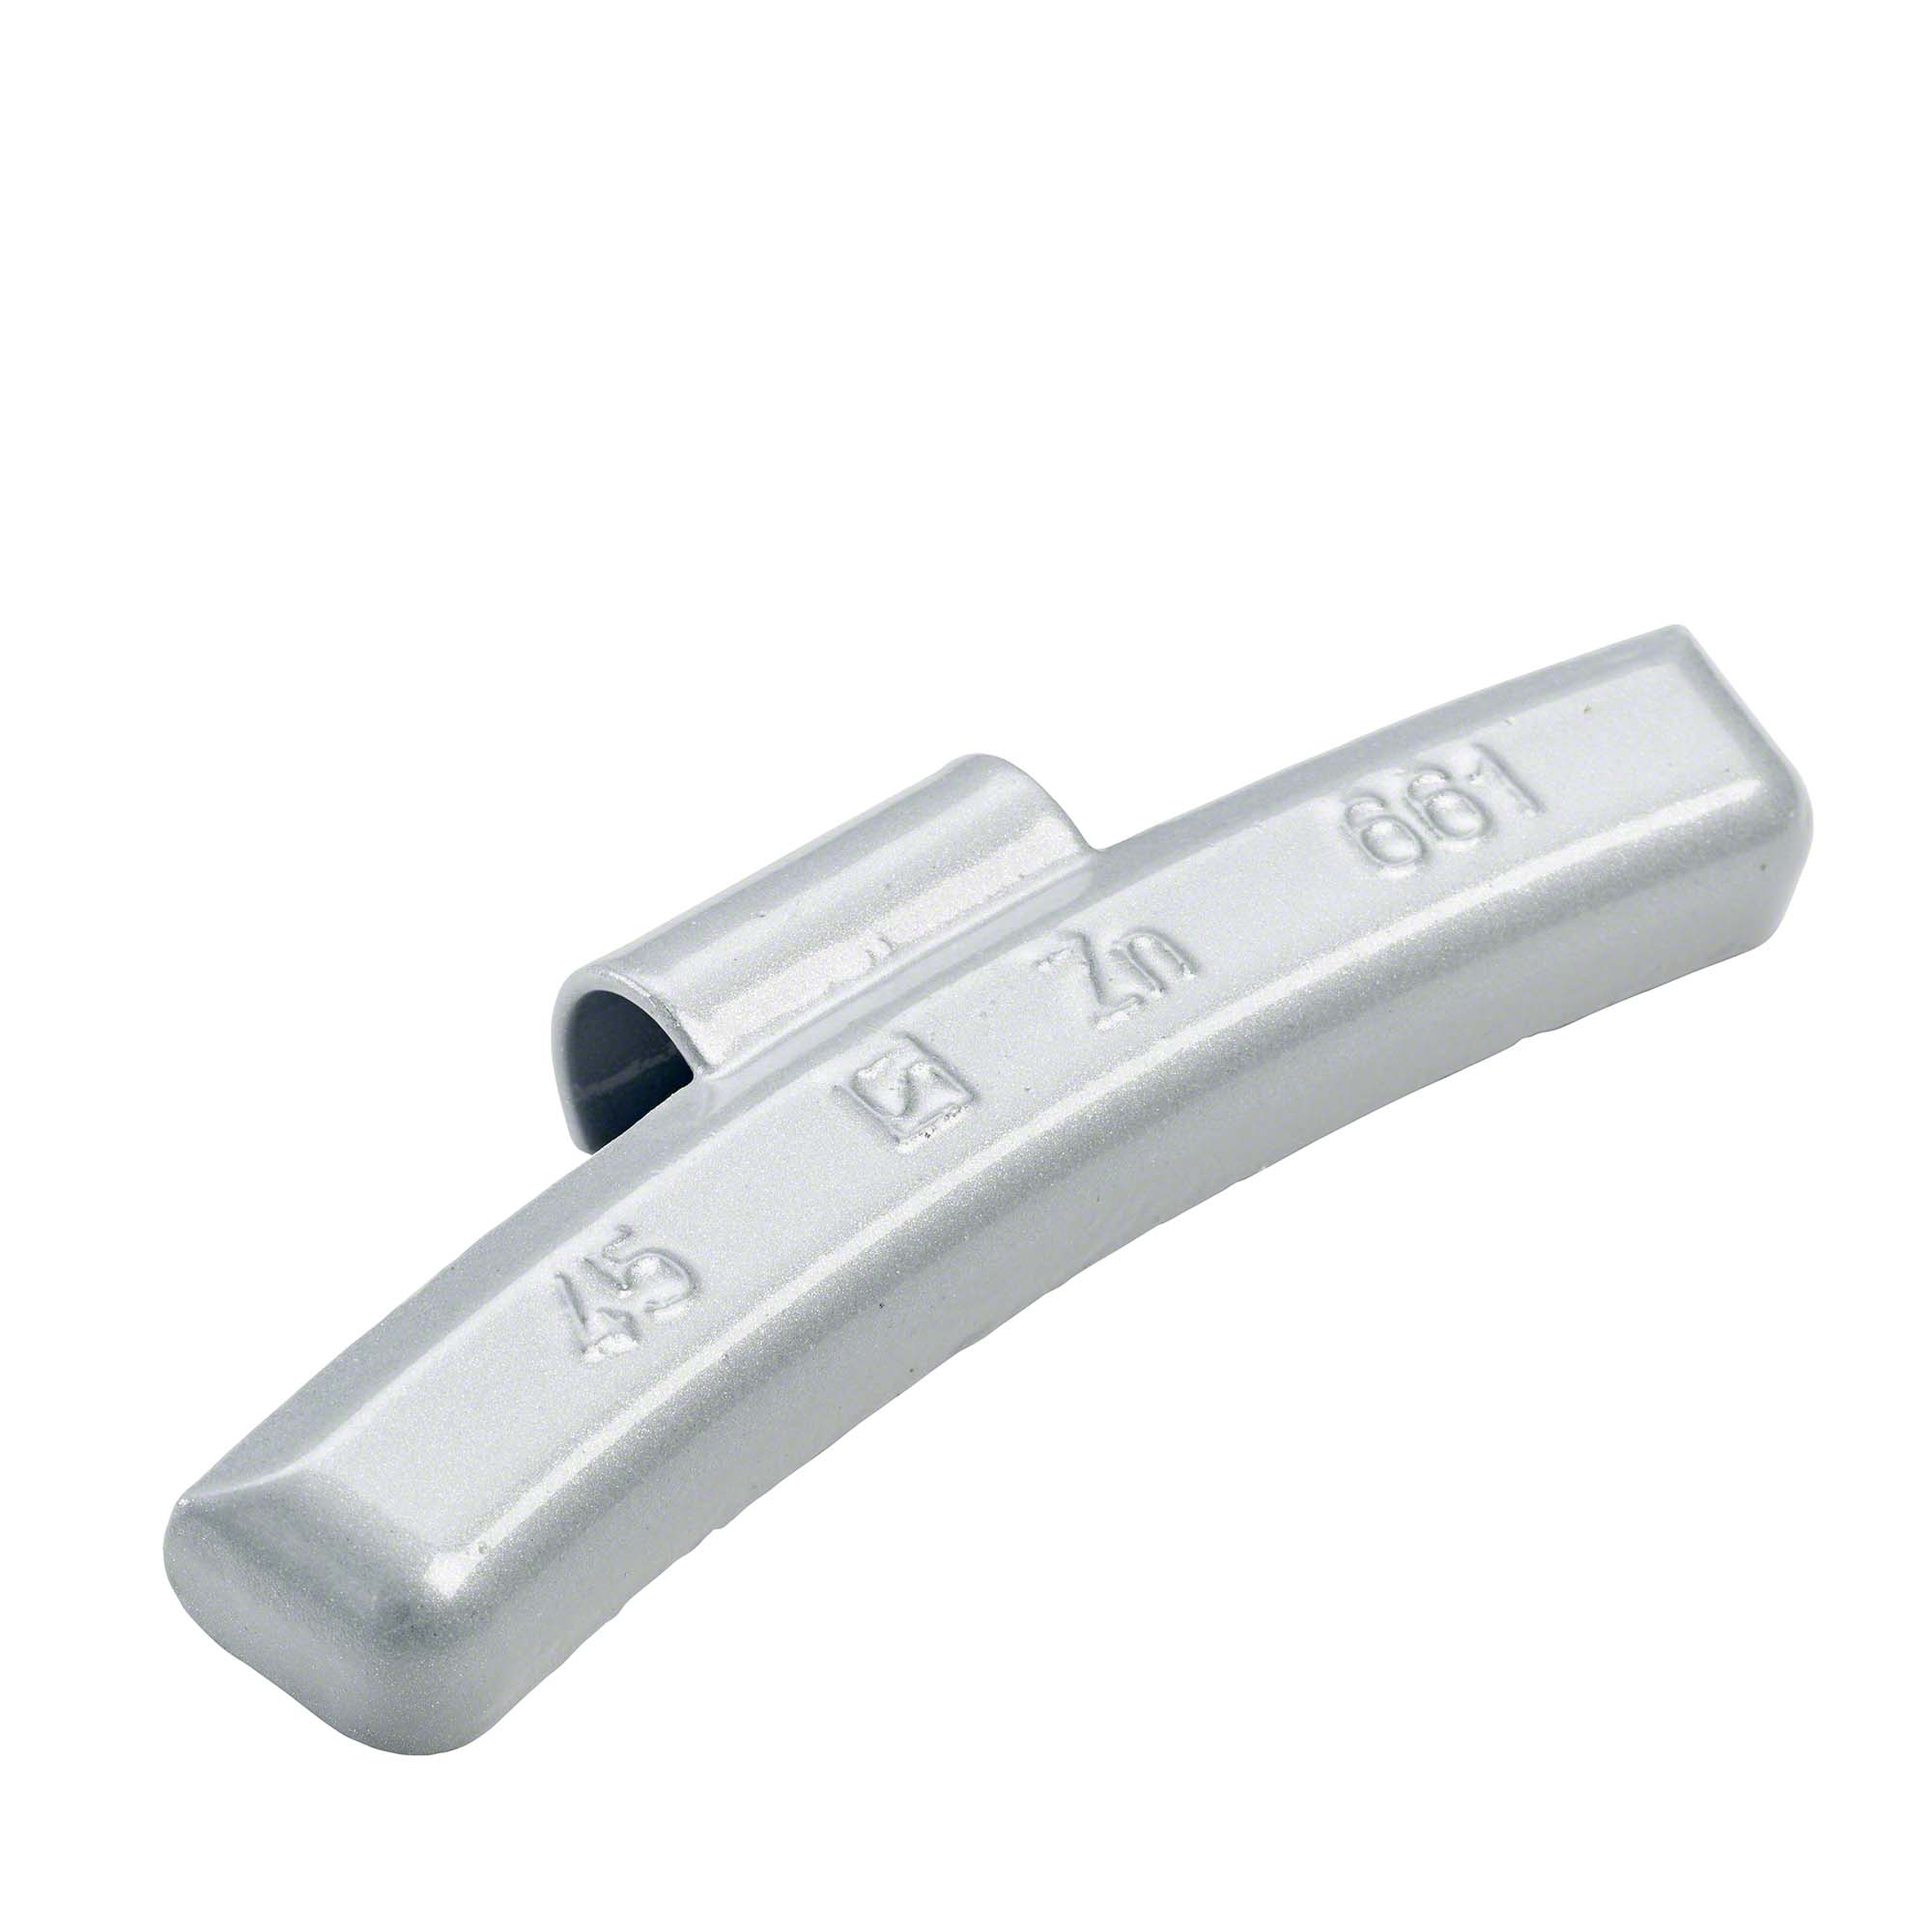 knock-on weight - Typ 661, 45 g, zinc, silver